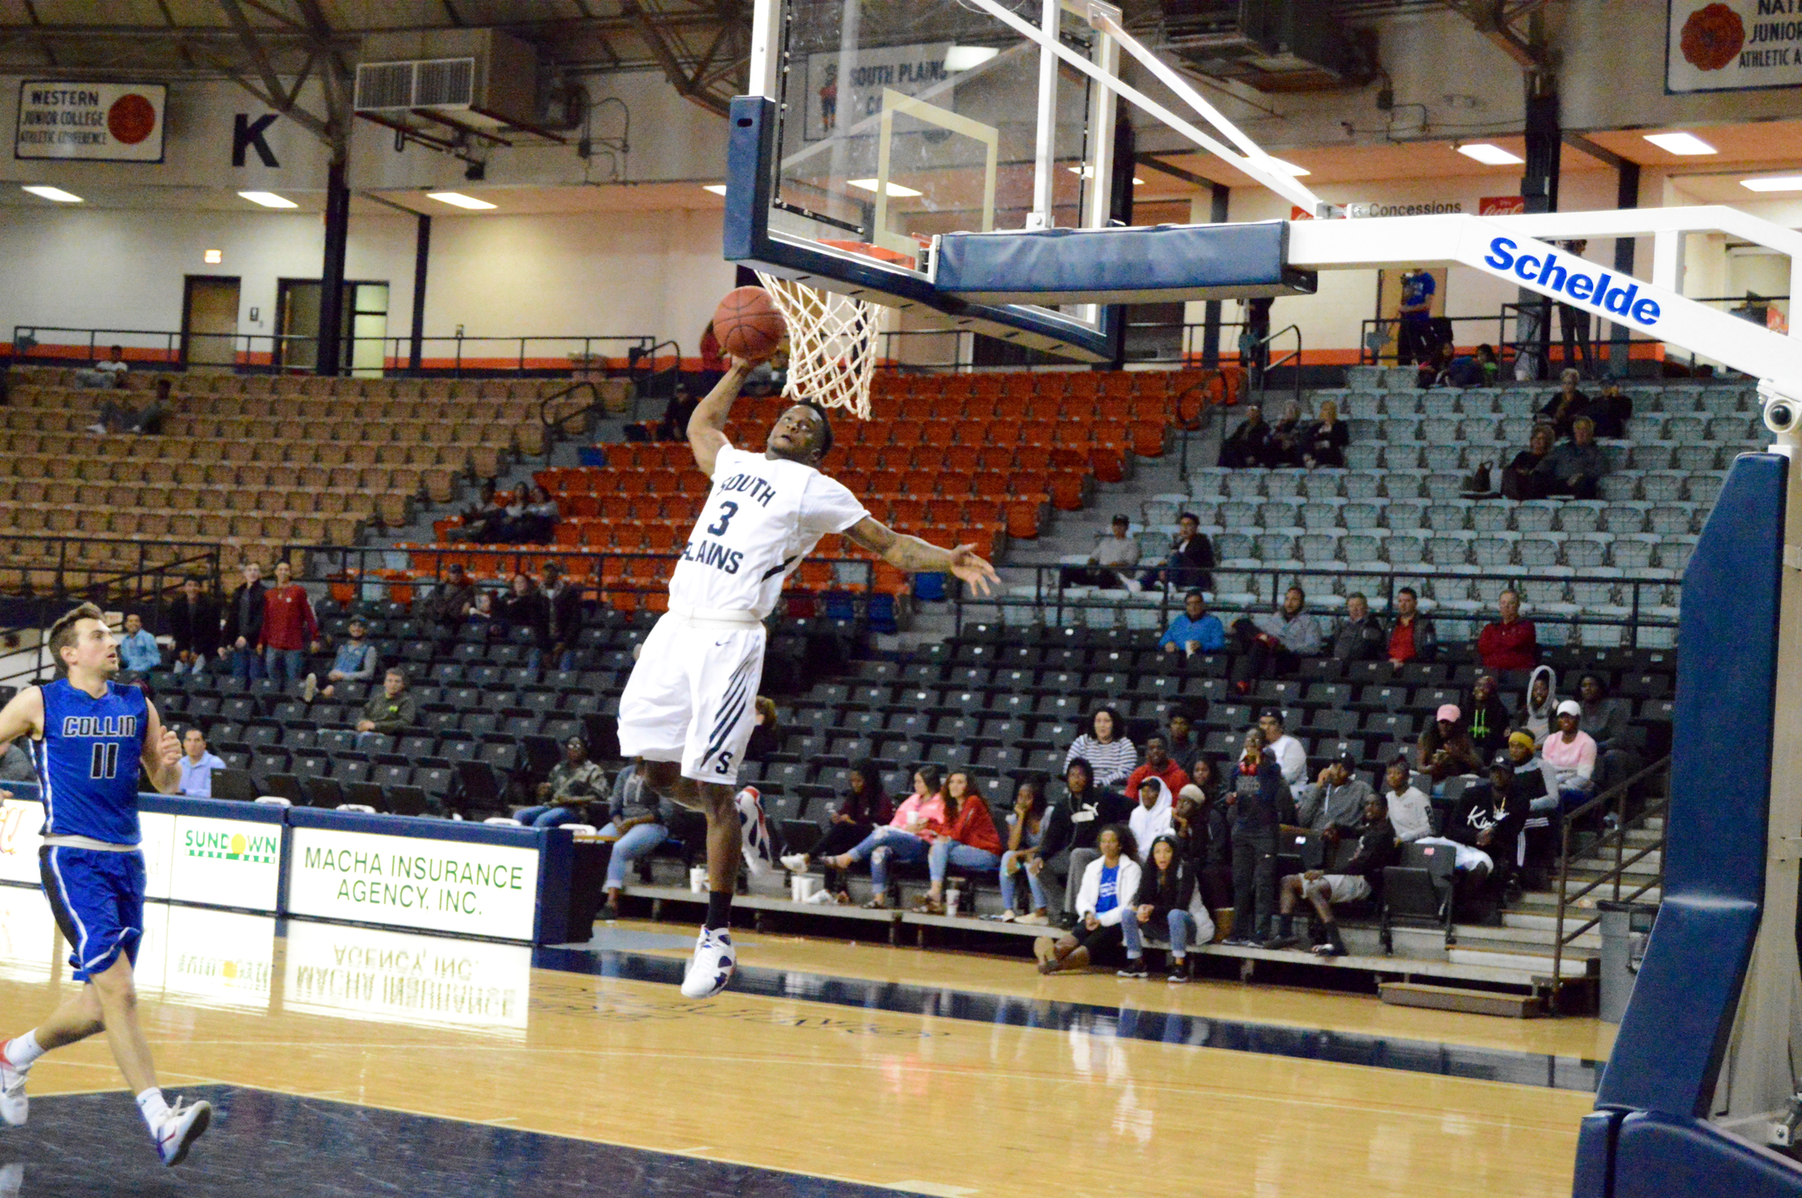 Texans drum Collin County 113-75 to improve to 5-0